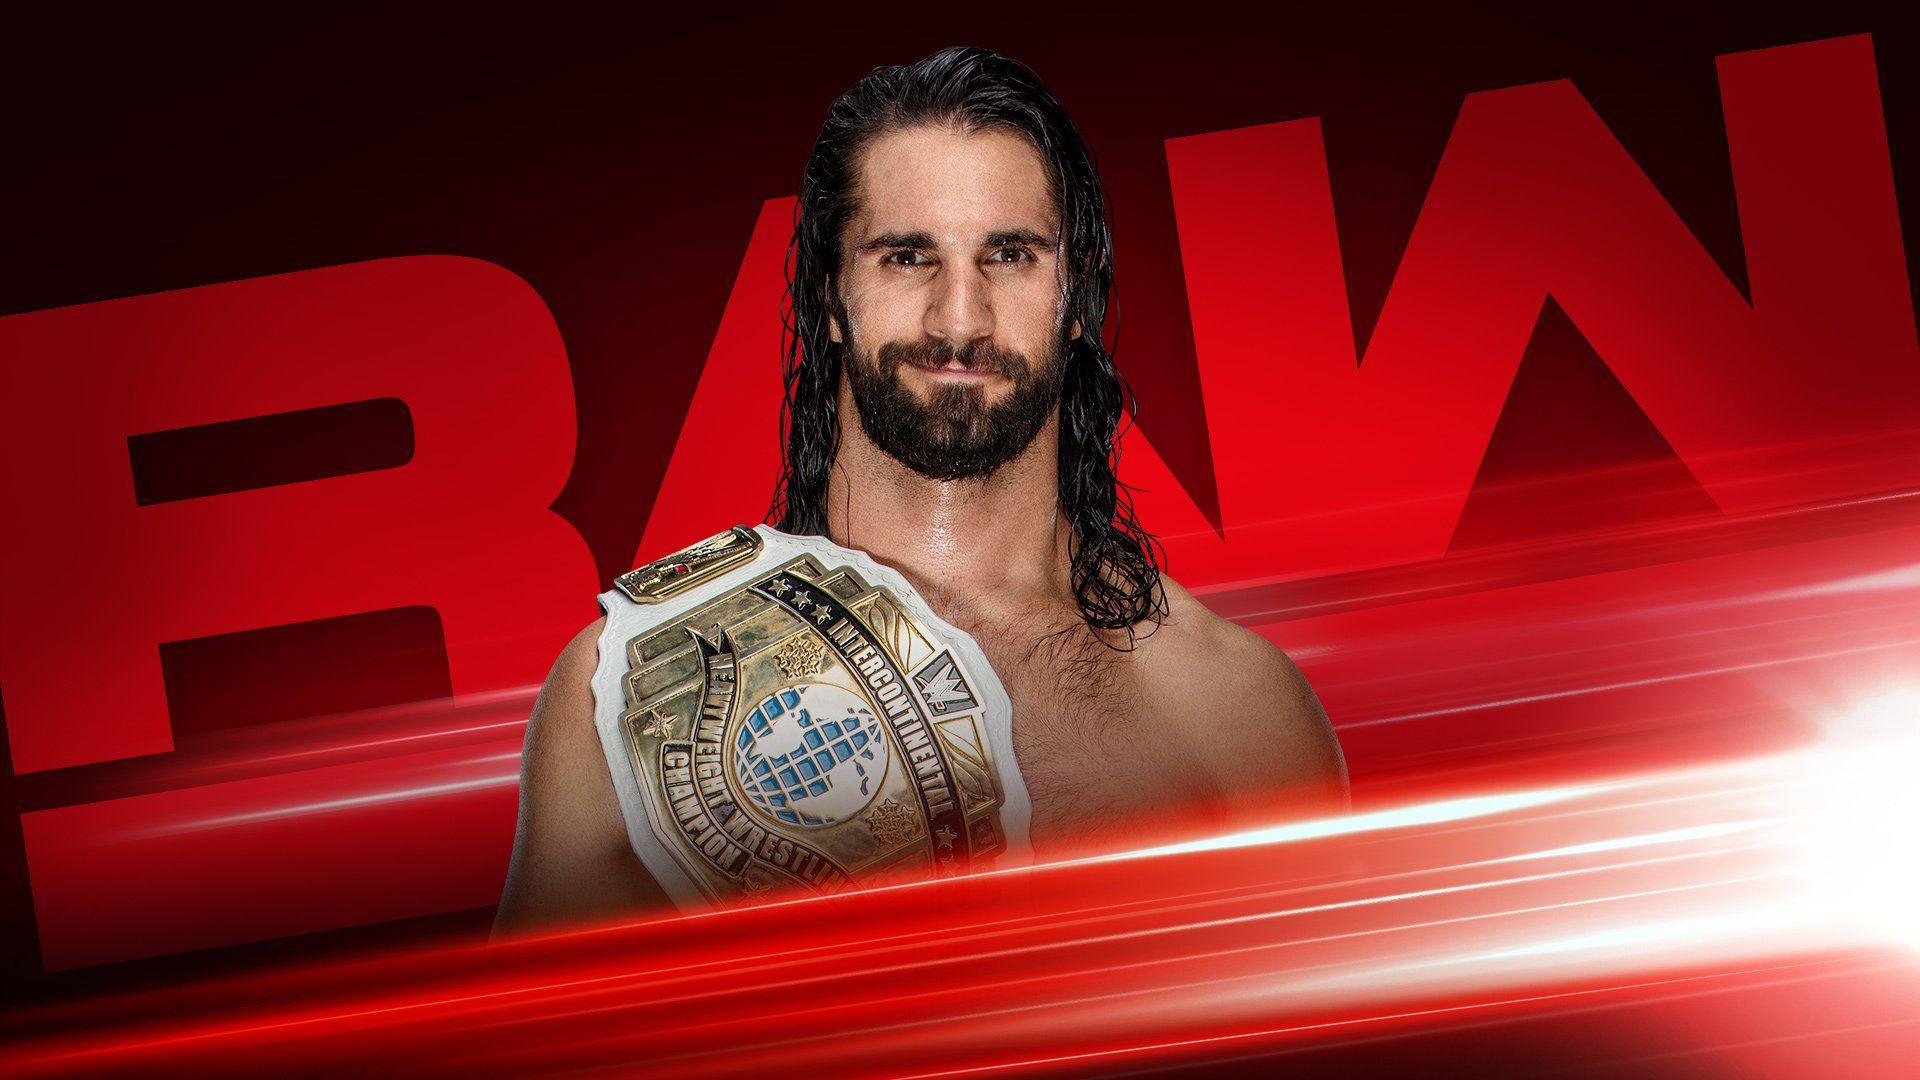 WWE MONDAY NIGHT RAW Highlights For December 2018